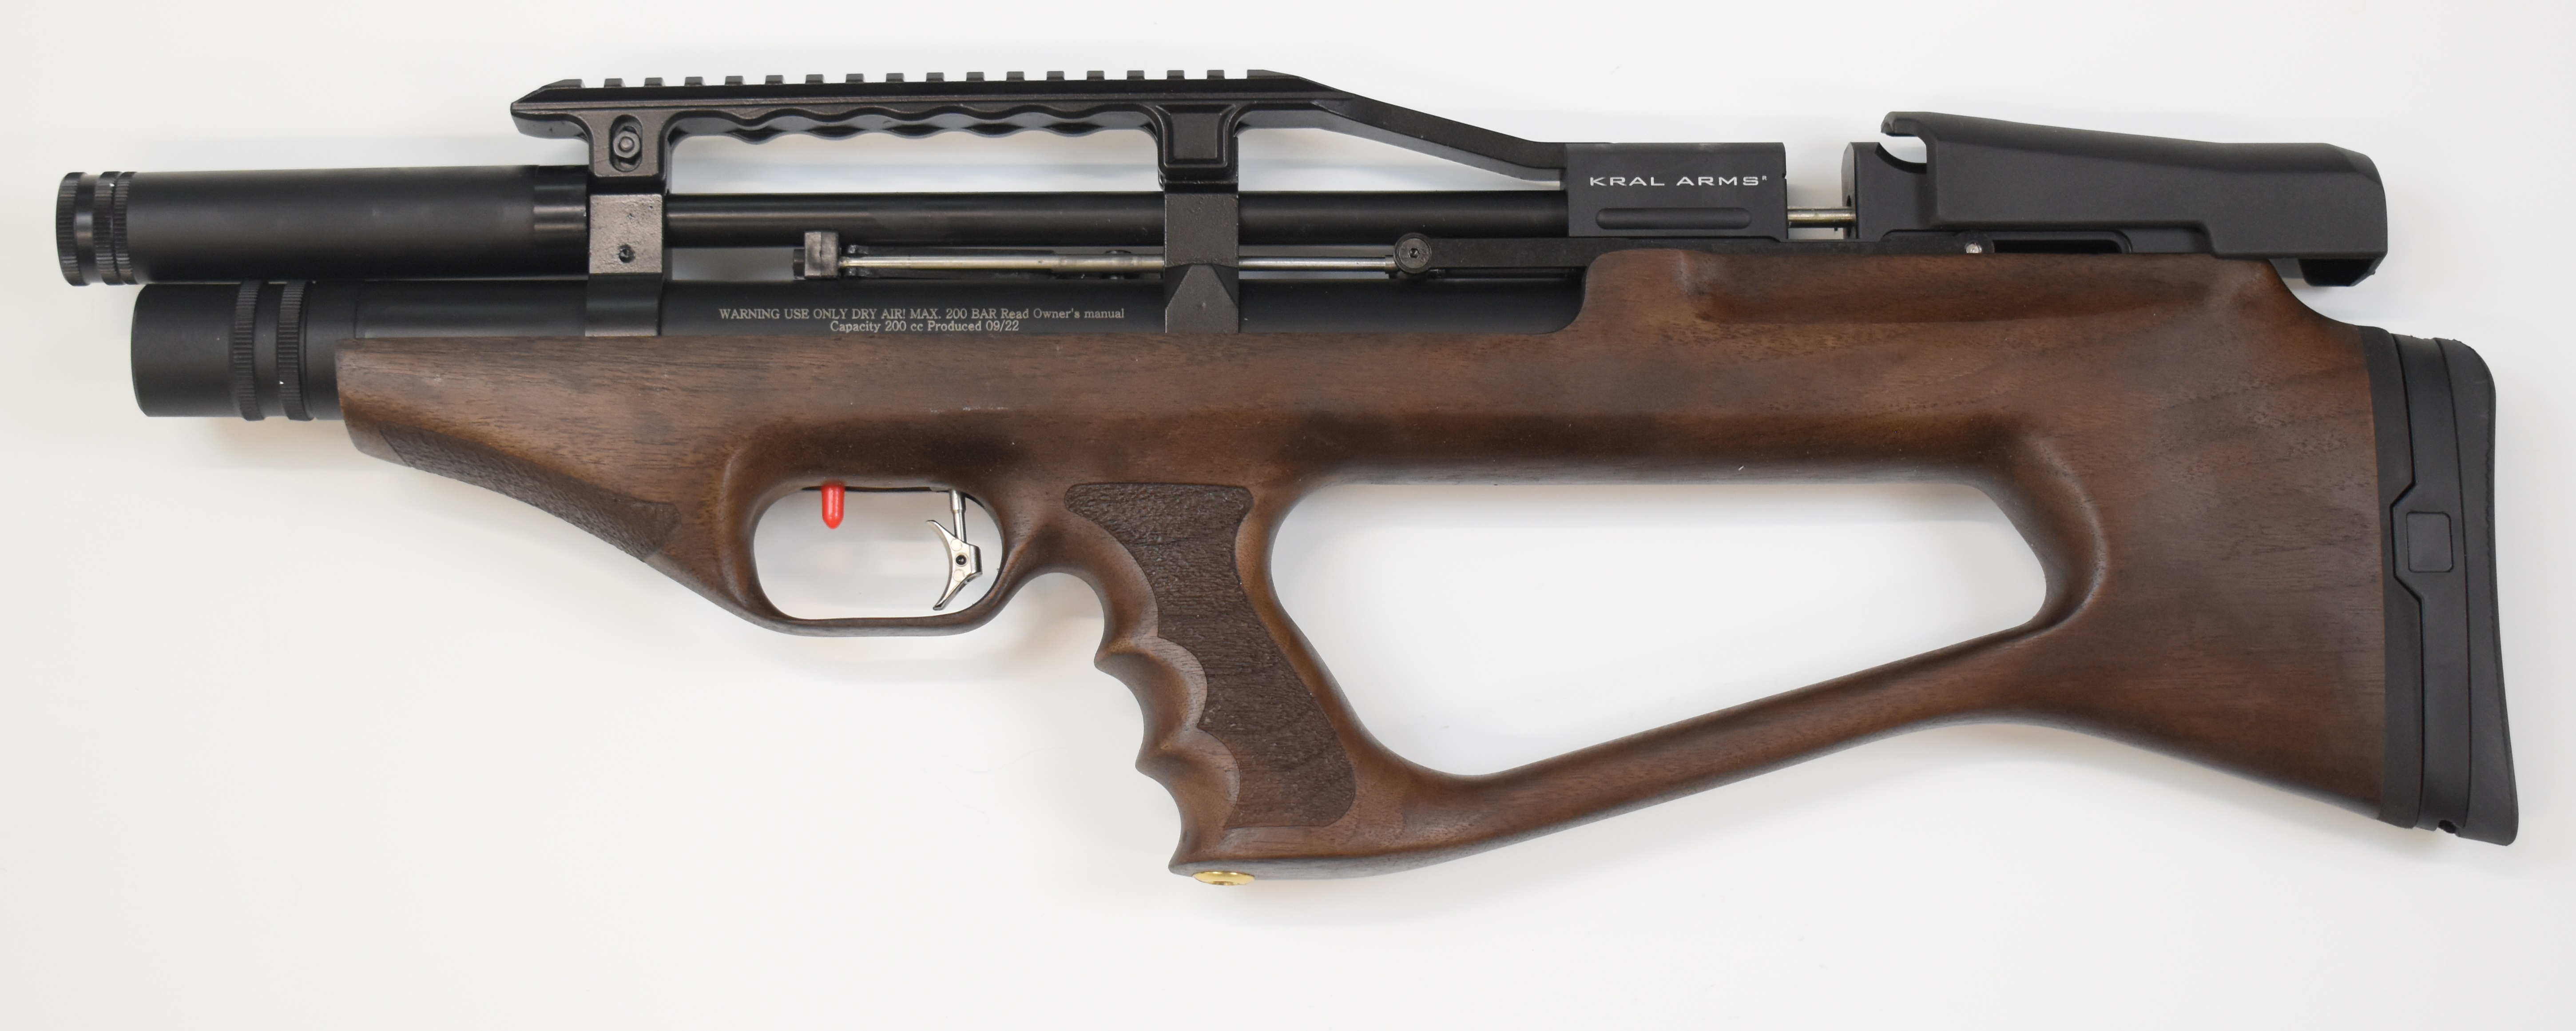 Kral Puncher Empire XS .22 PCP carbine air rifle with textured pistol grip, two 14-shot magazines - Image 6 of 9